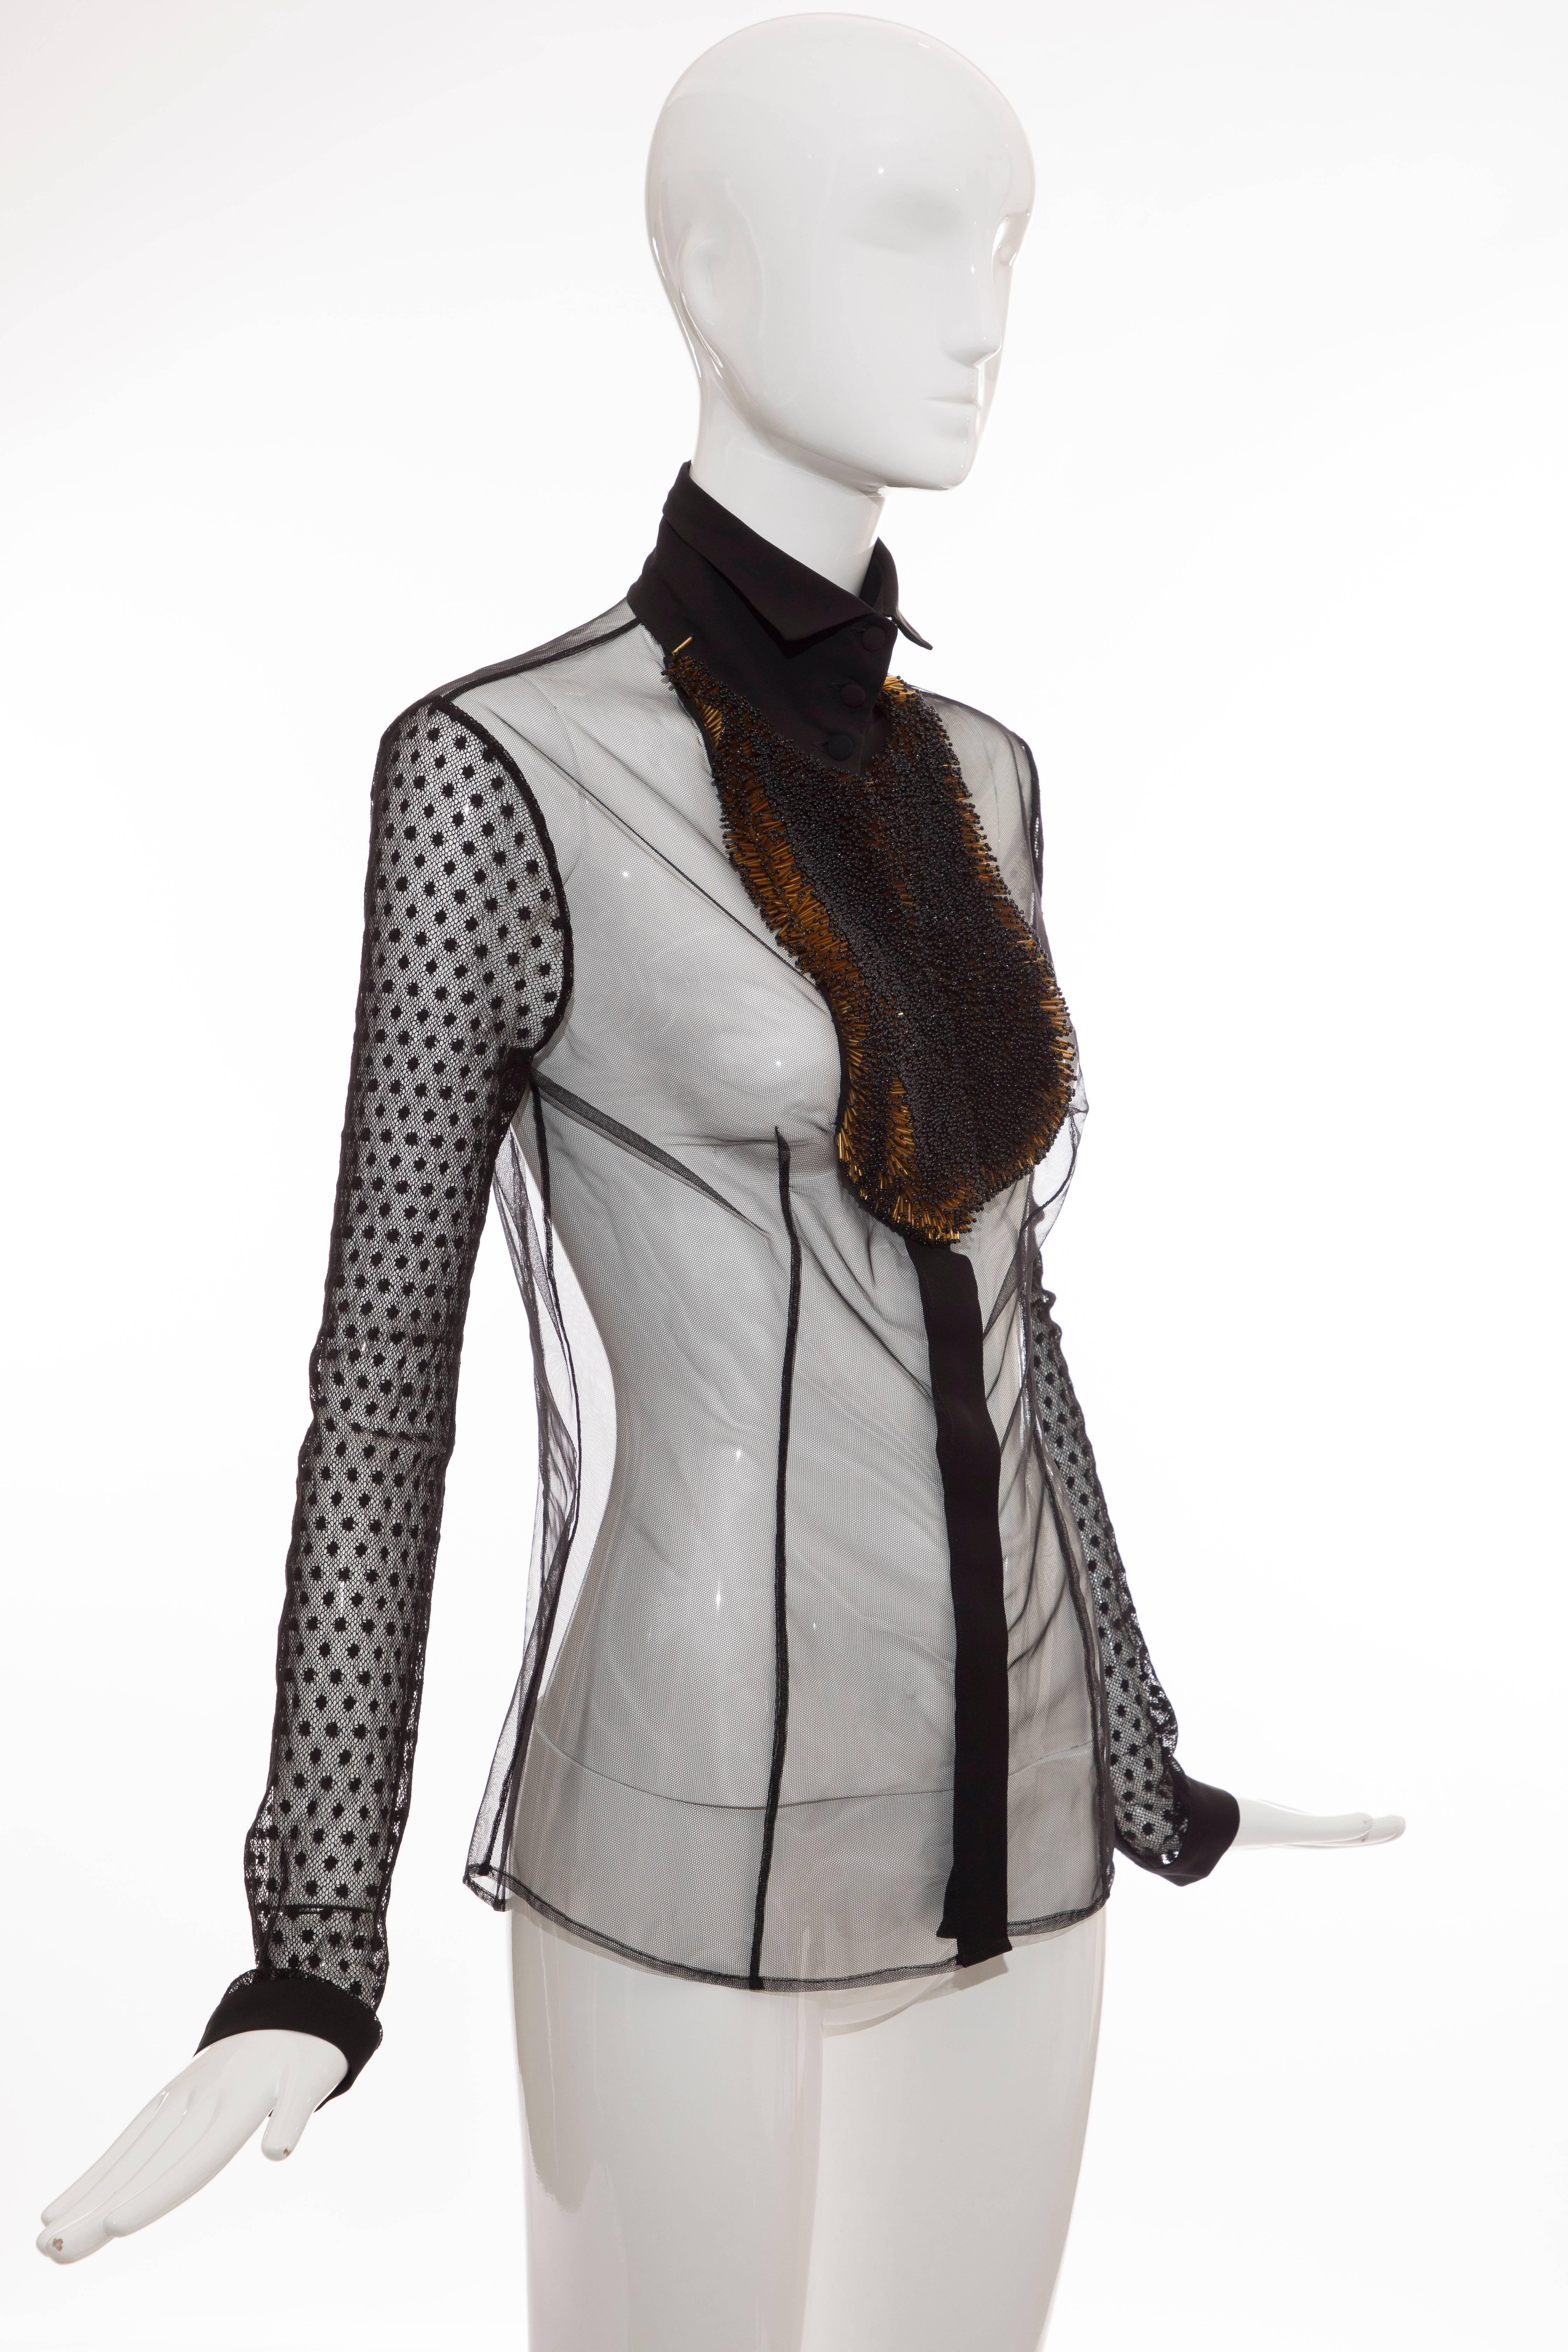 Viktor & Rolf Runway Black Sheer Blouse Copper Bead Embellishment, Fall 2012 In Excellent Condition For Sale In Cincinnati, OH